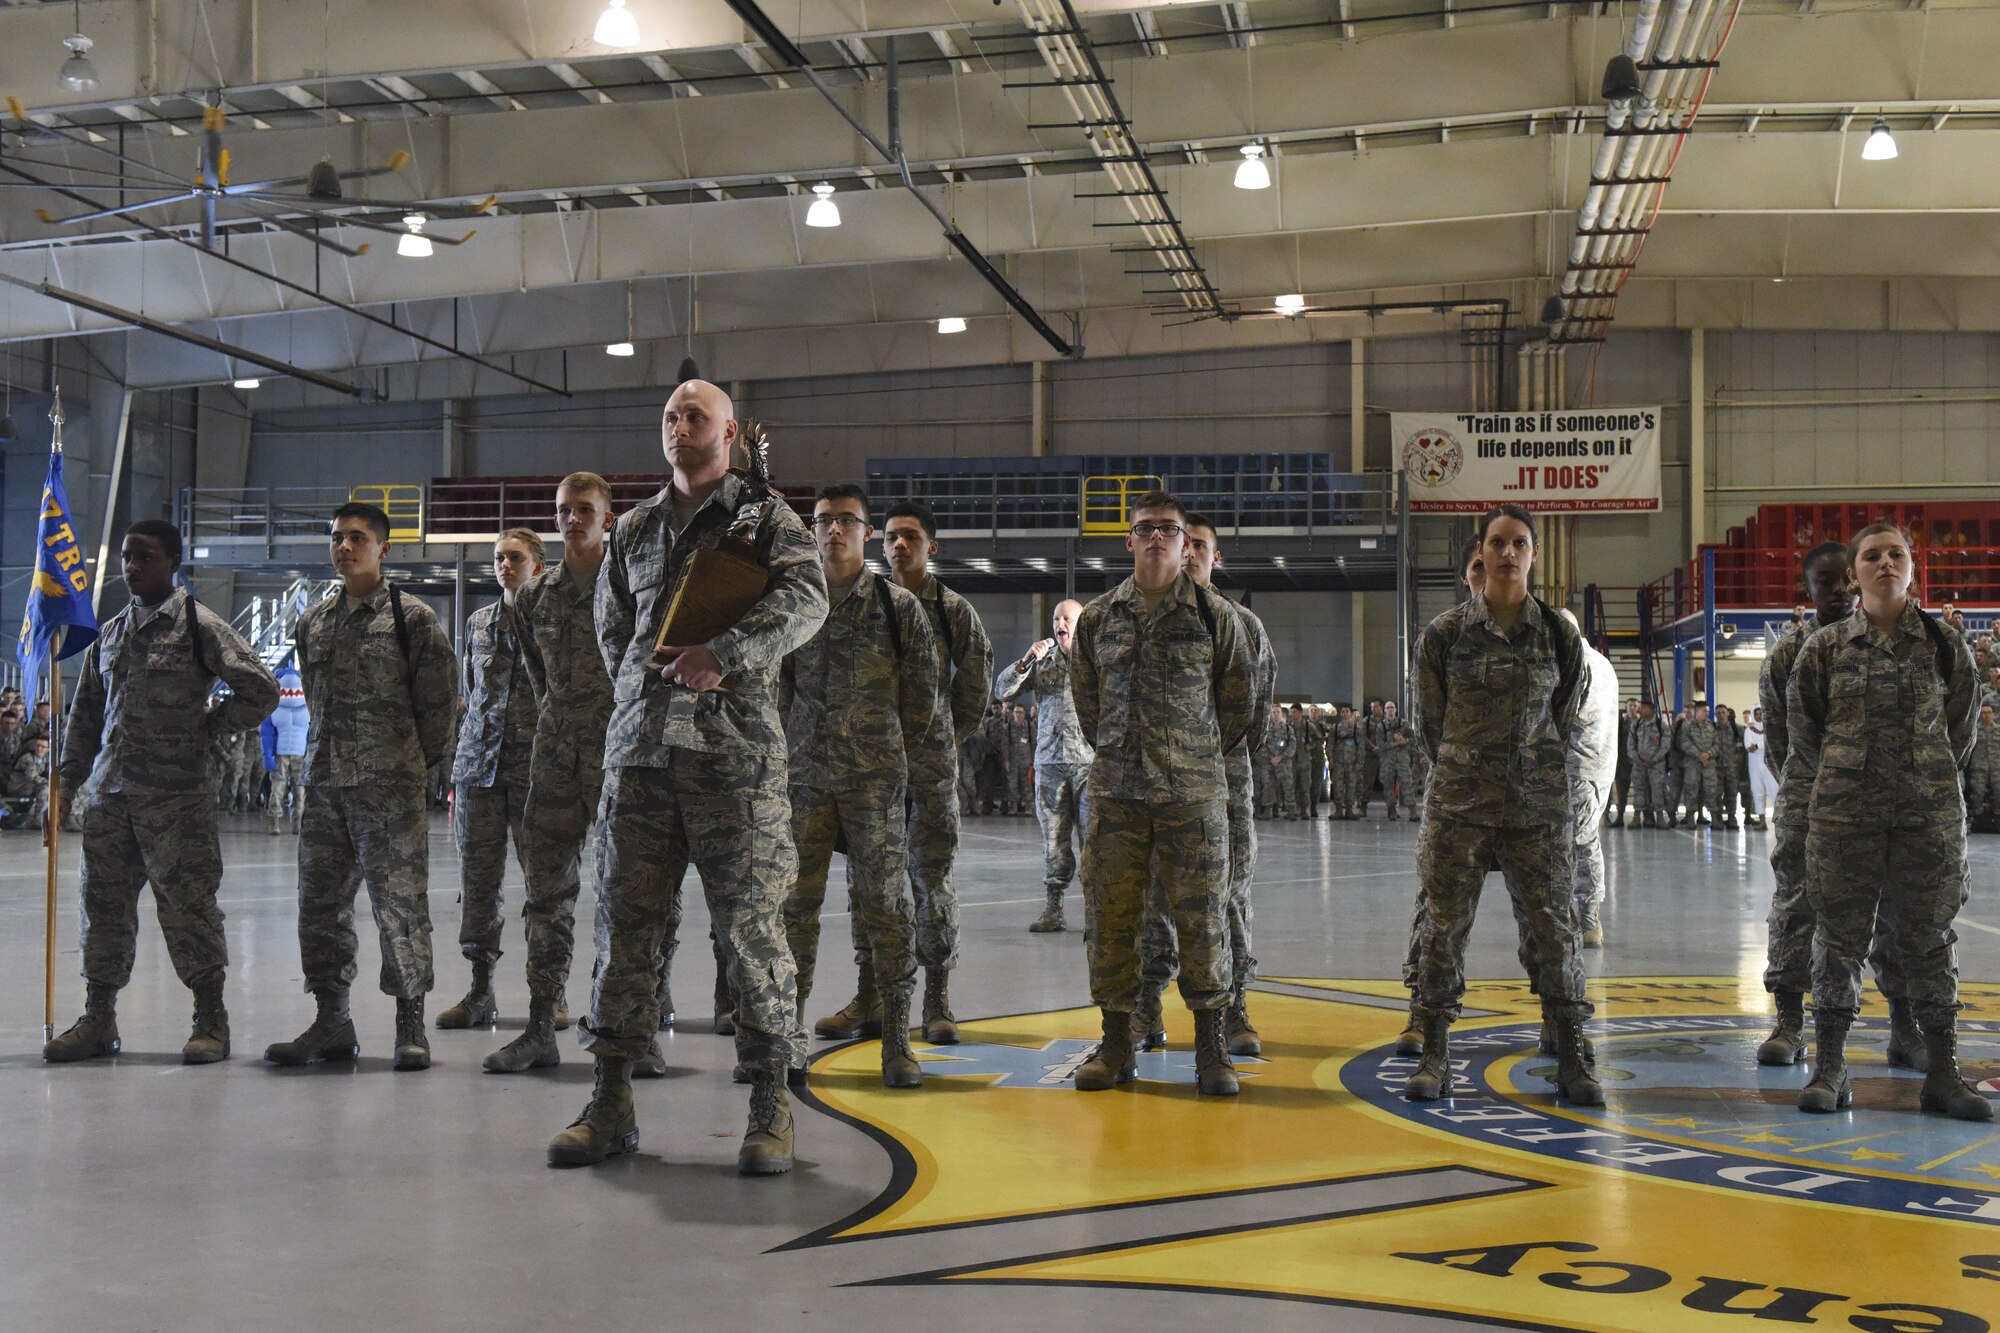 The 316th Training Squadron drill team poses with the trophy moments after winning the 17th Training Group drill competition at the Louis F. Garland Department of Defense Fire Academy on Goodfellow Air Force Base, Texas, Dec. 15, 2017. The 316th TRS won all three categories of the competition. (U.S. Air Force Photo by Airman 1st Class Zachary Chapman/Released)